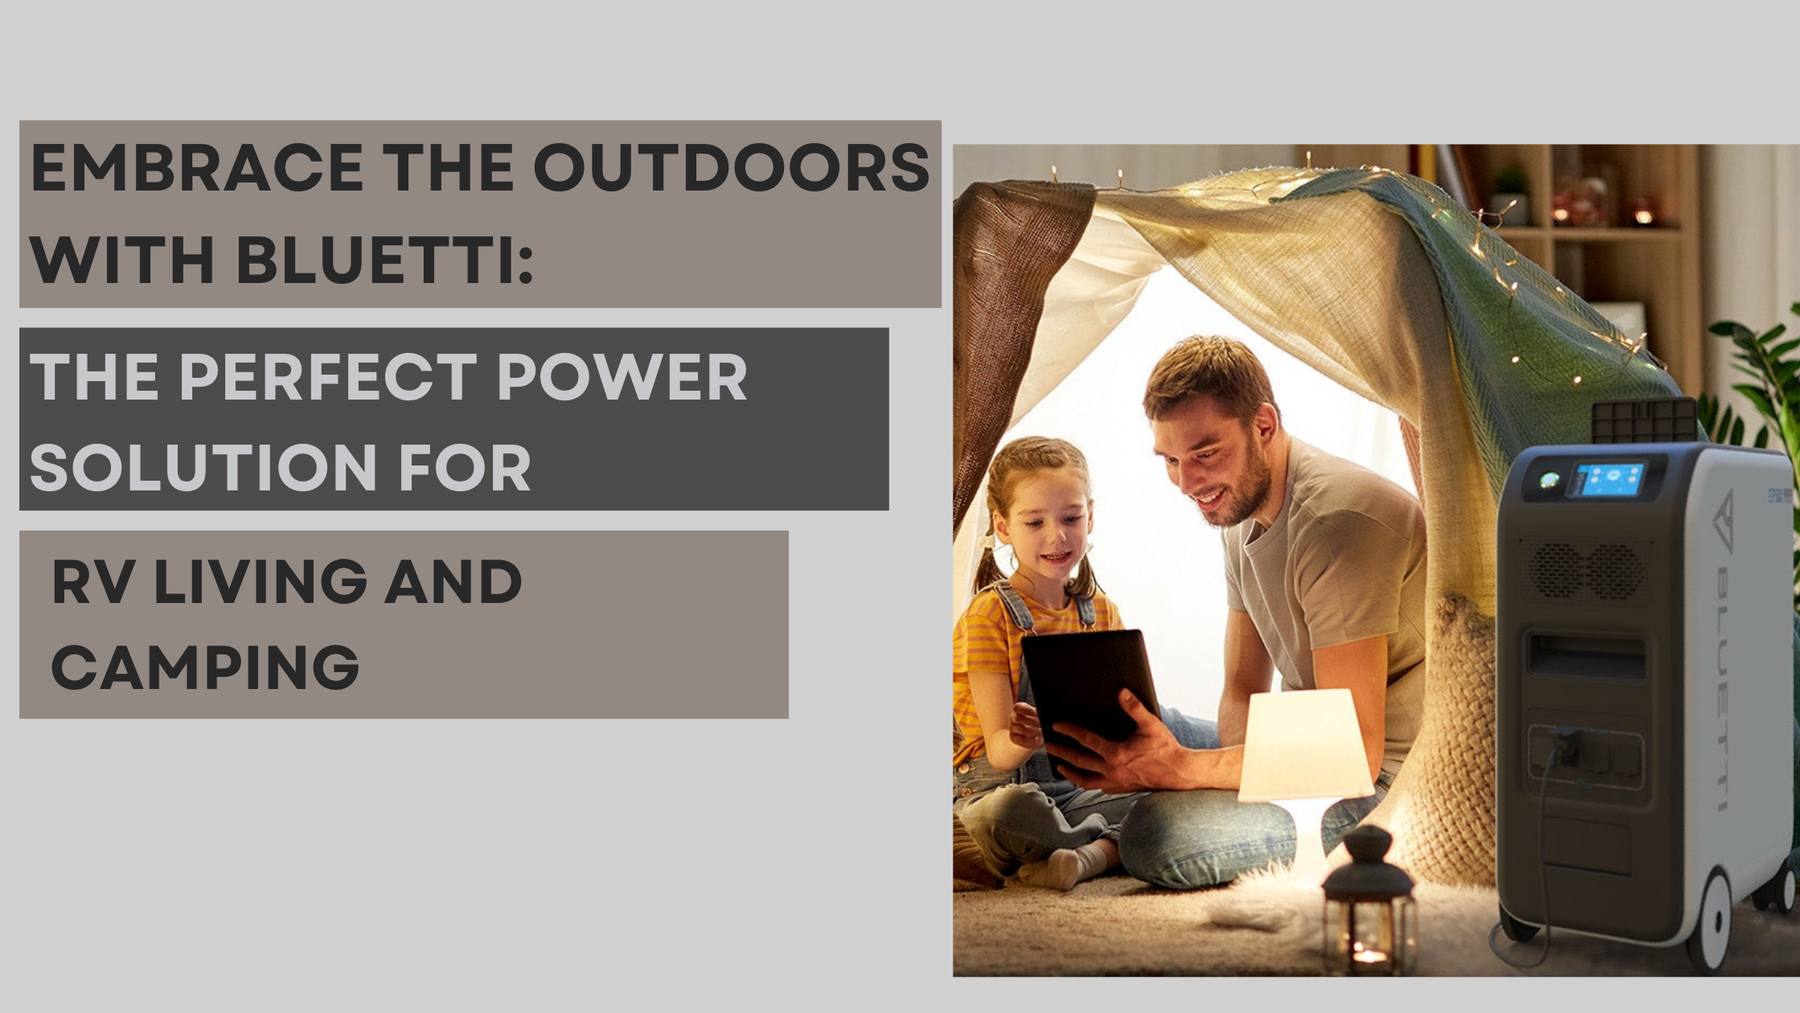 Embrace the Outdoors with Bluetti: The Perfect Power Solution for RV Living and Camping